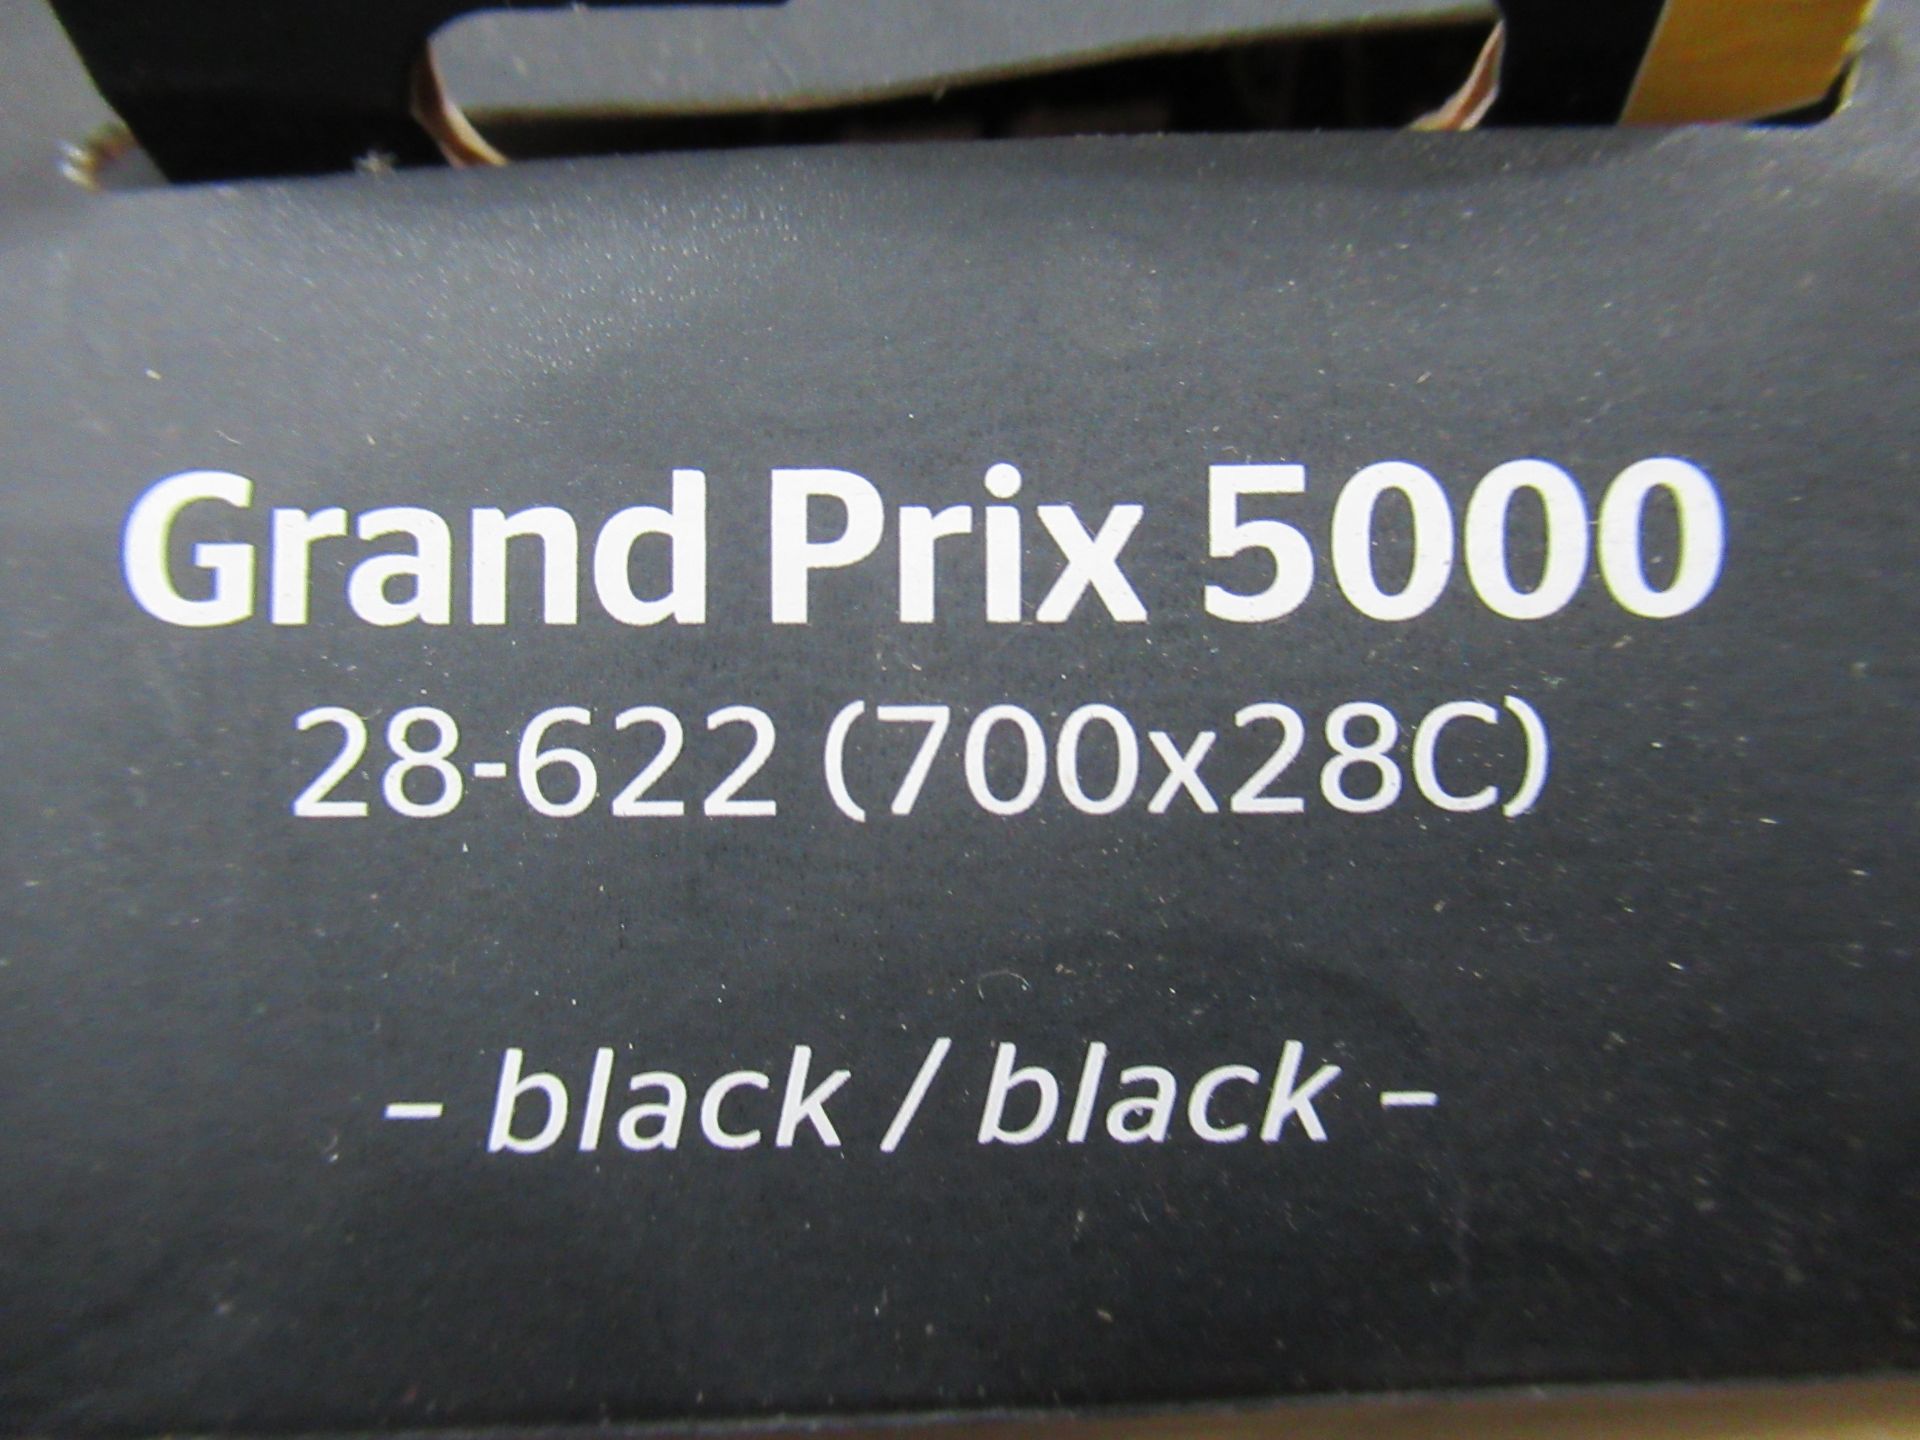 3 x Continental Grand Prix 5000 tyres - 1 x 700x25c; 1 x 700x28c and 1 x 700 x 30c (total RRP£239.85 - Image 3 of 4